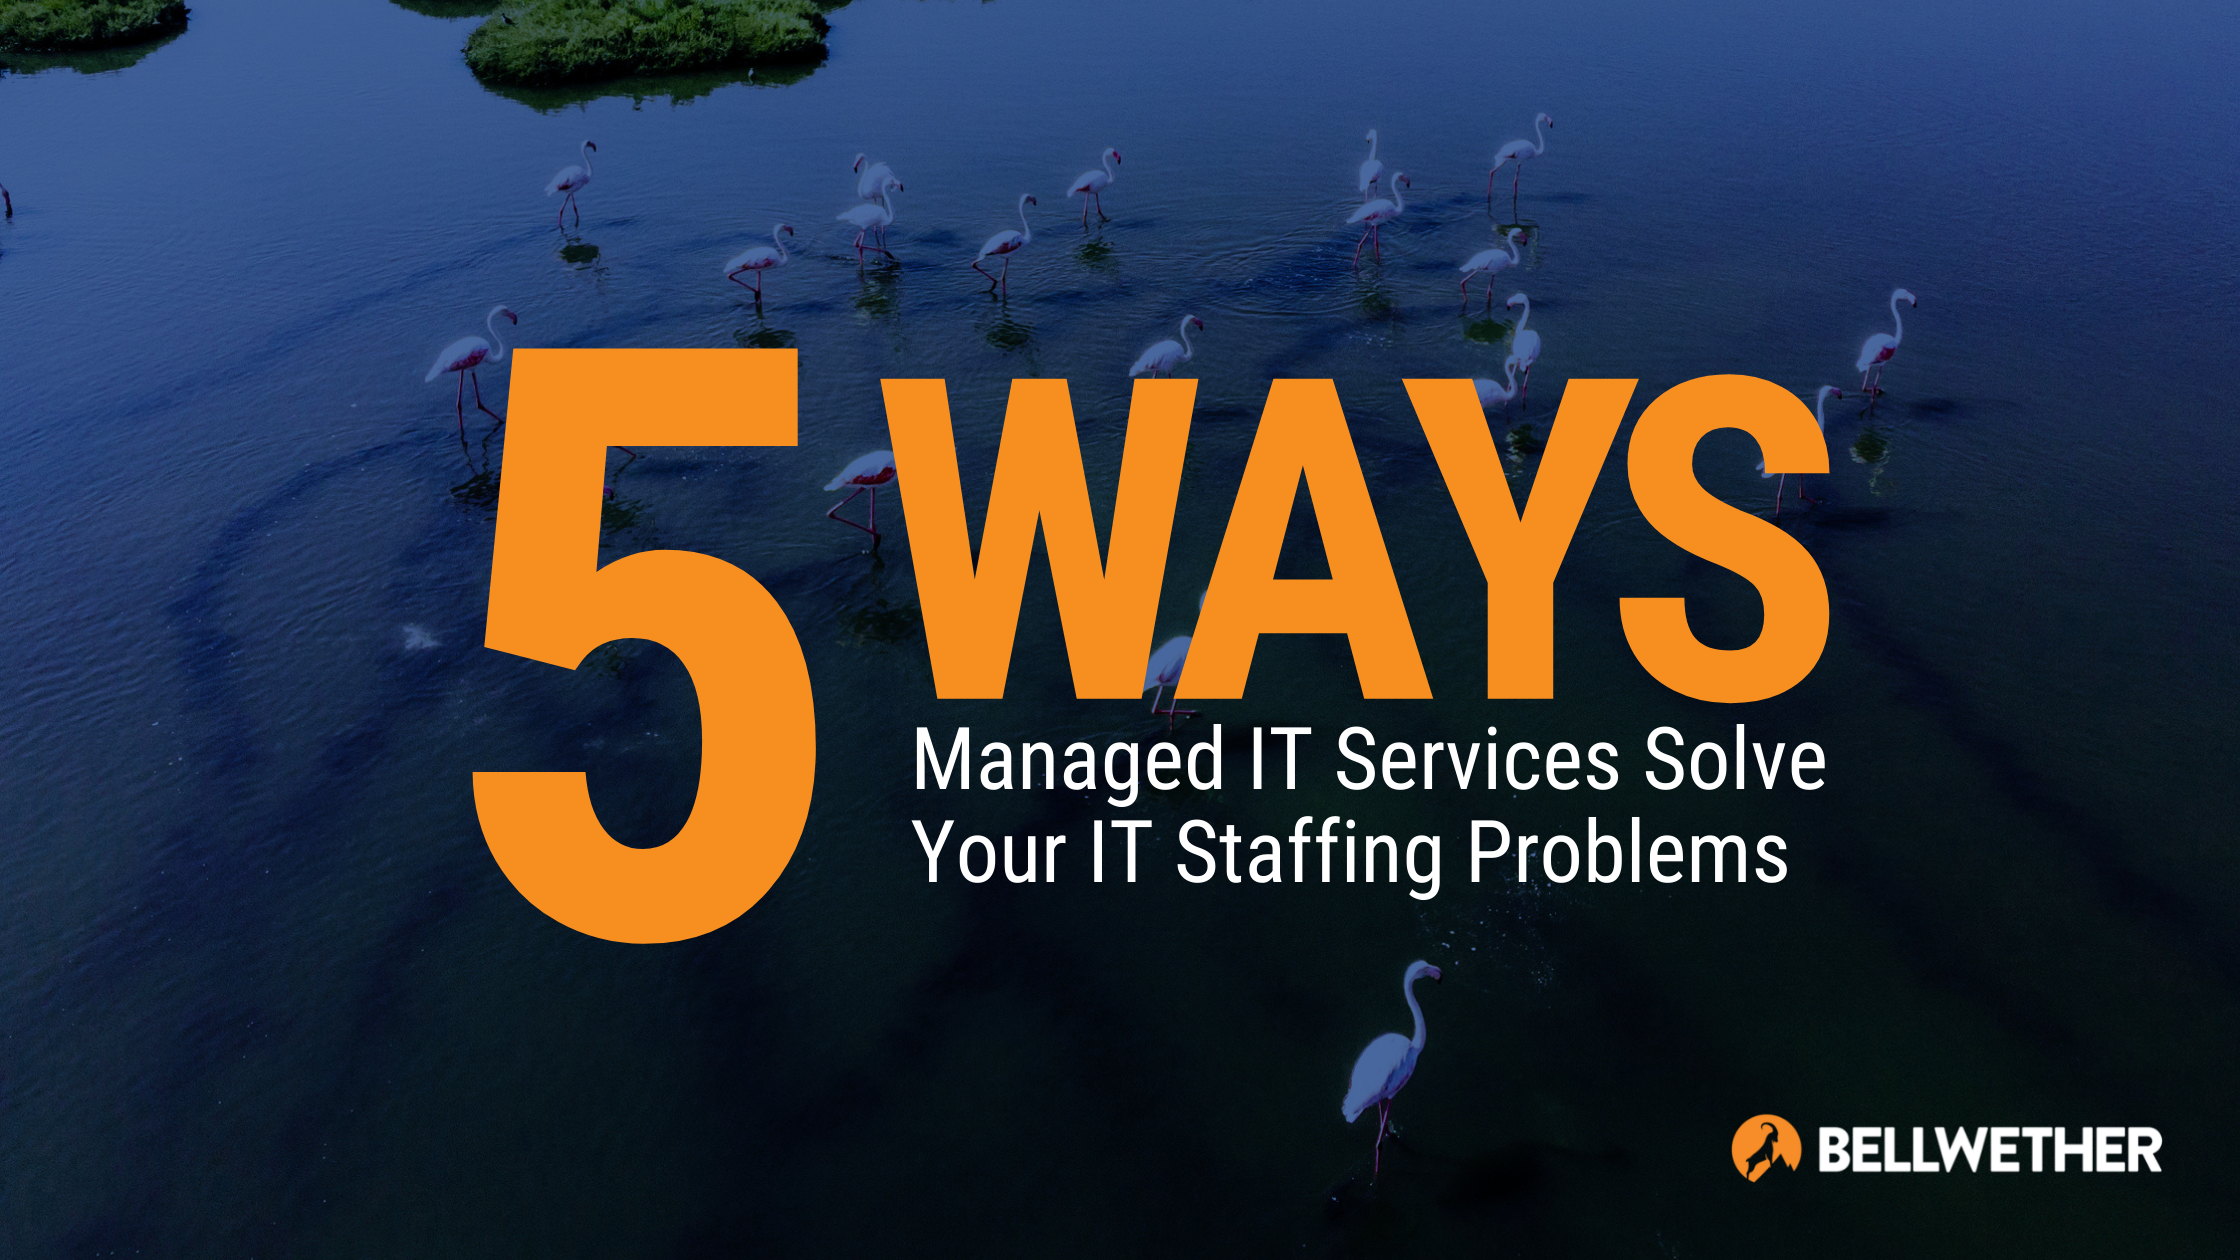 5 Ways Managed IT Services Solve Your IT Staffing Problems